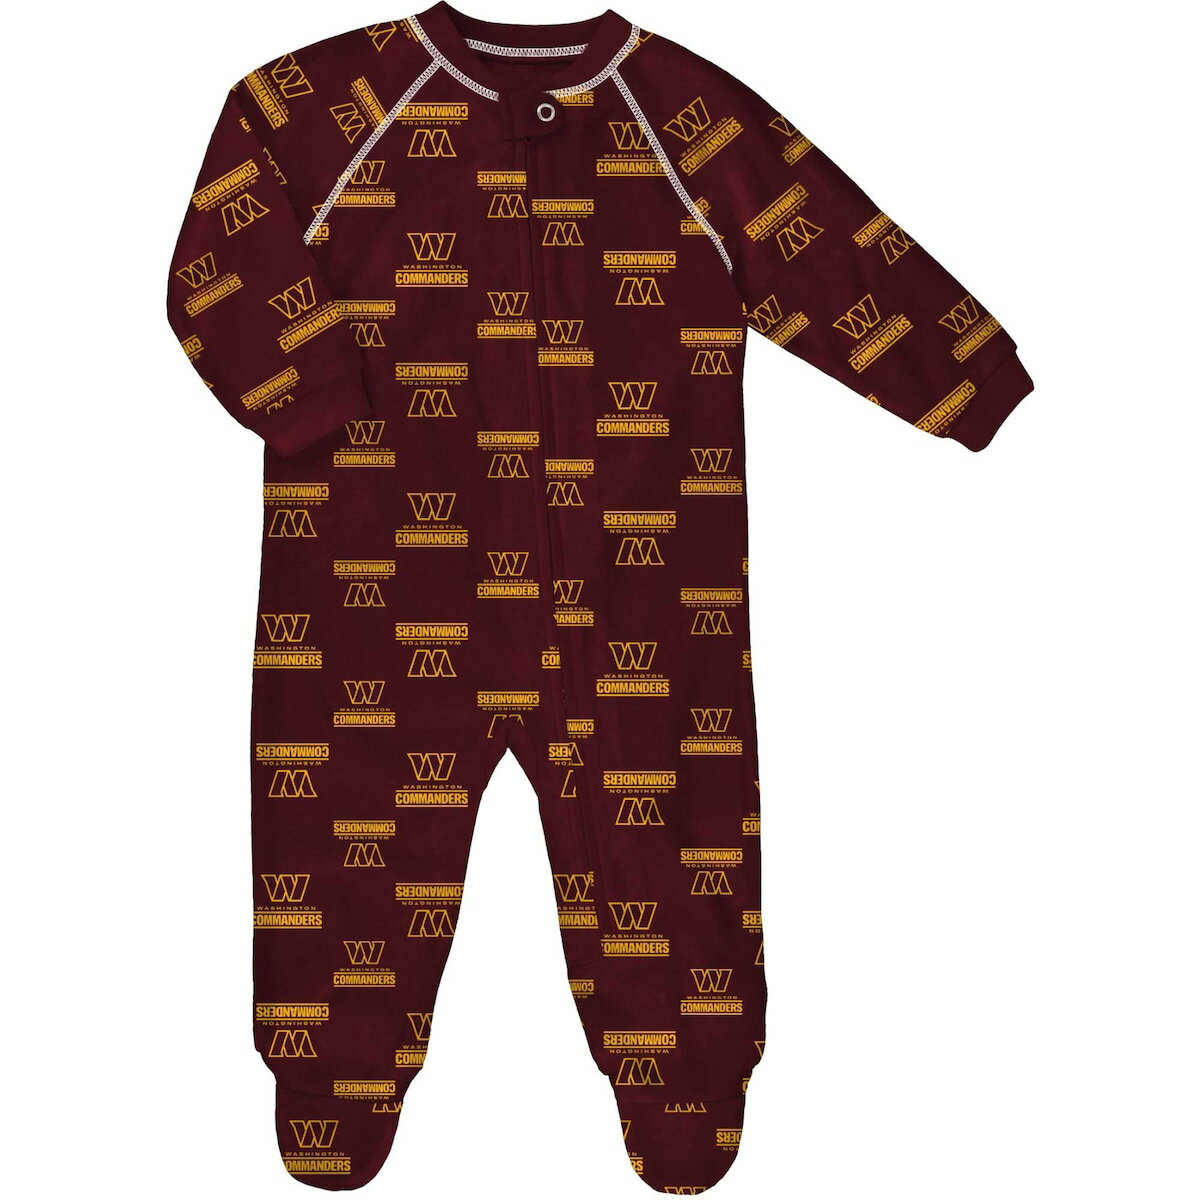 Provide your budding Washington Commanders fan with comfort and spirit each night by dressing them in this full-zip jumper. It features roomy raglan sleeves so they can stretch, crawl and sleep in comfort. An allover Washington Commanders print easily displays which team they'll root for each Sunday.Machine wash with garment inside out, tumble dry lowOfficially licensedRaglan sleevesFlame resistantFull-zipFlatlock stitchingImportedMaterial: 100% PolyesterSnap closure at neckInseam on size 0/3M measures approx. 7.5"Inseam on size 3/6M measures approx. 8"Sublimated graphicsBrand: OuterstuffFooted with non-slip dotsLong sleeve